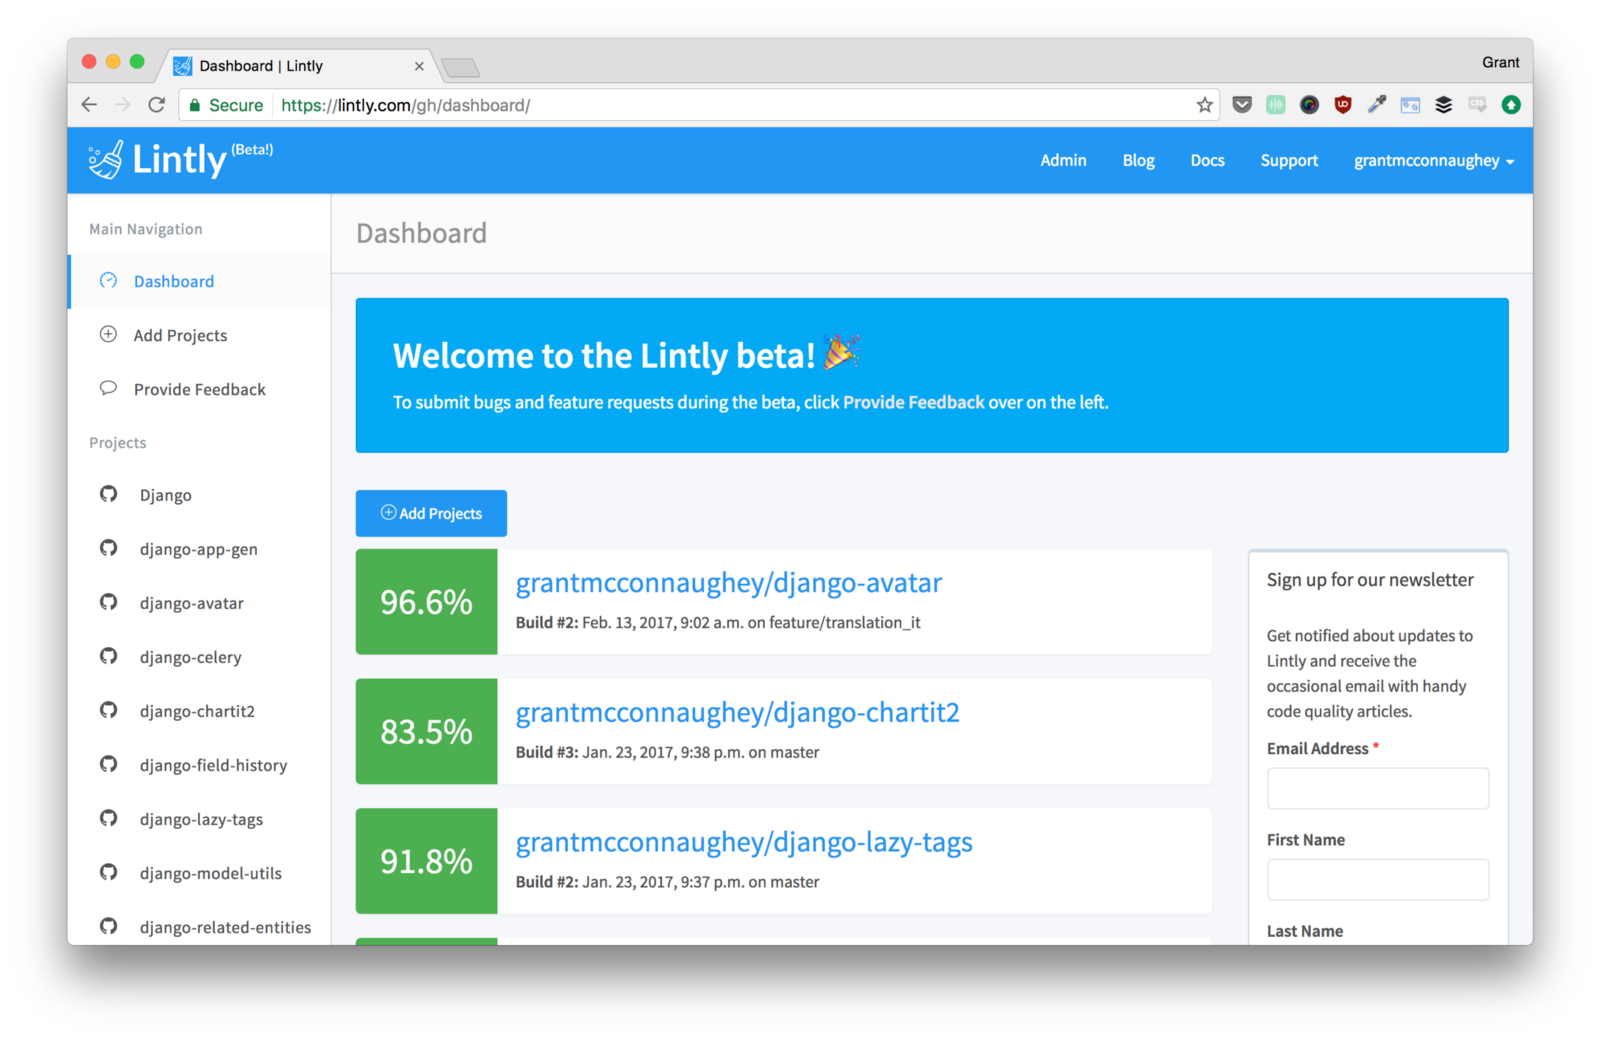 The Lintly Dashboard